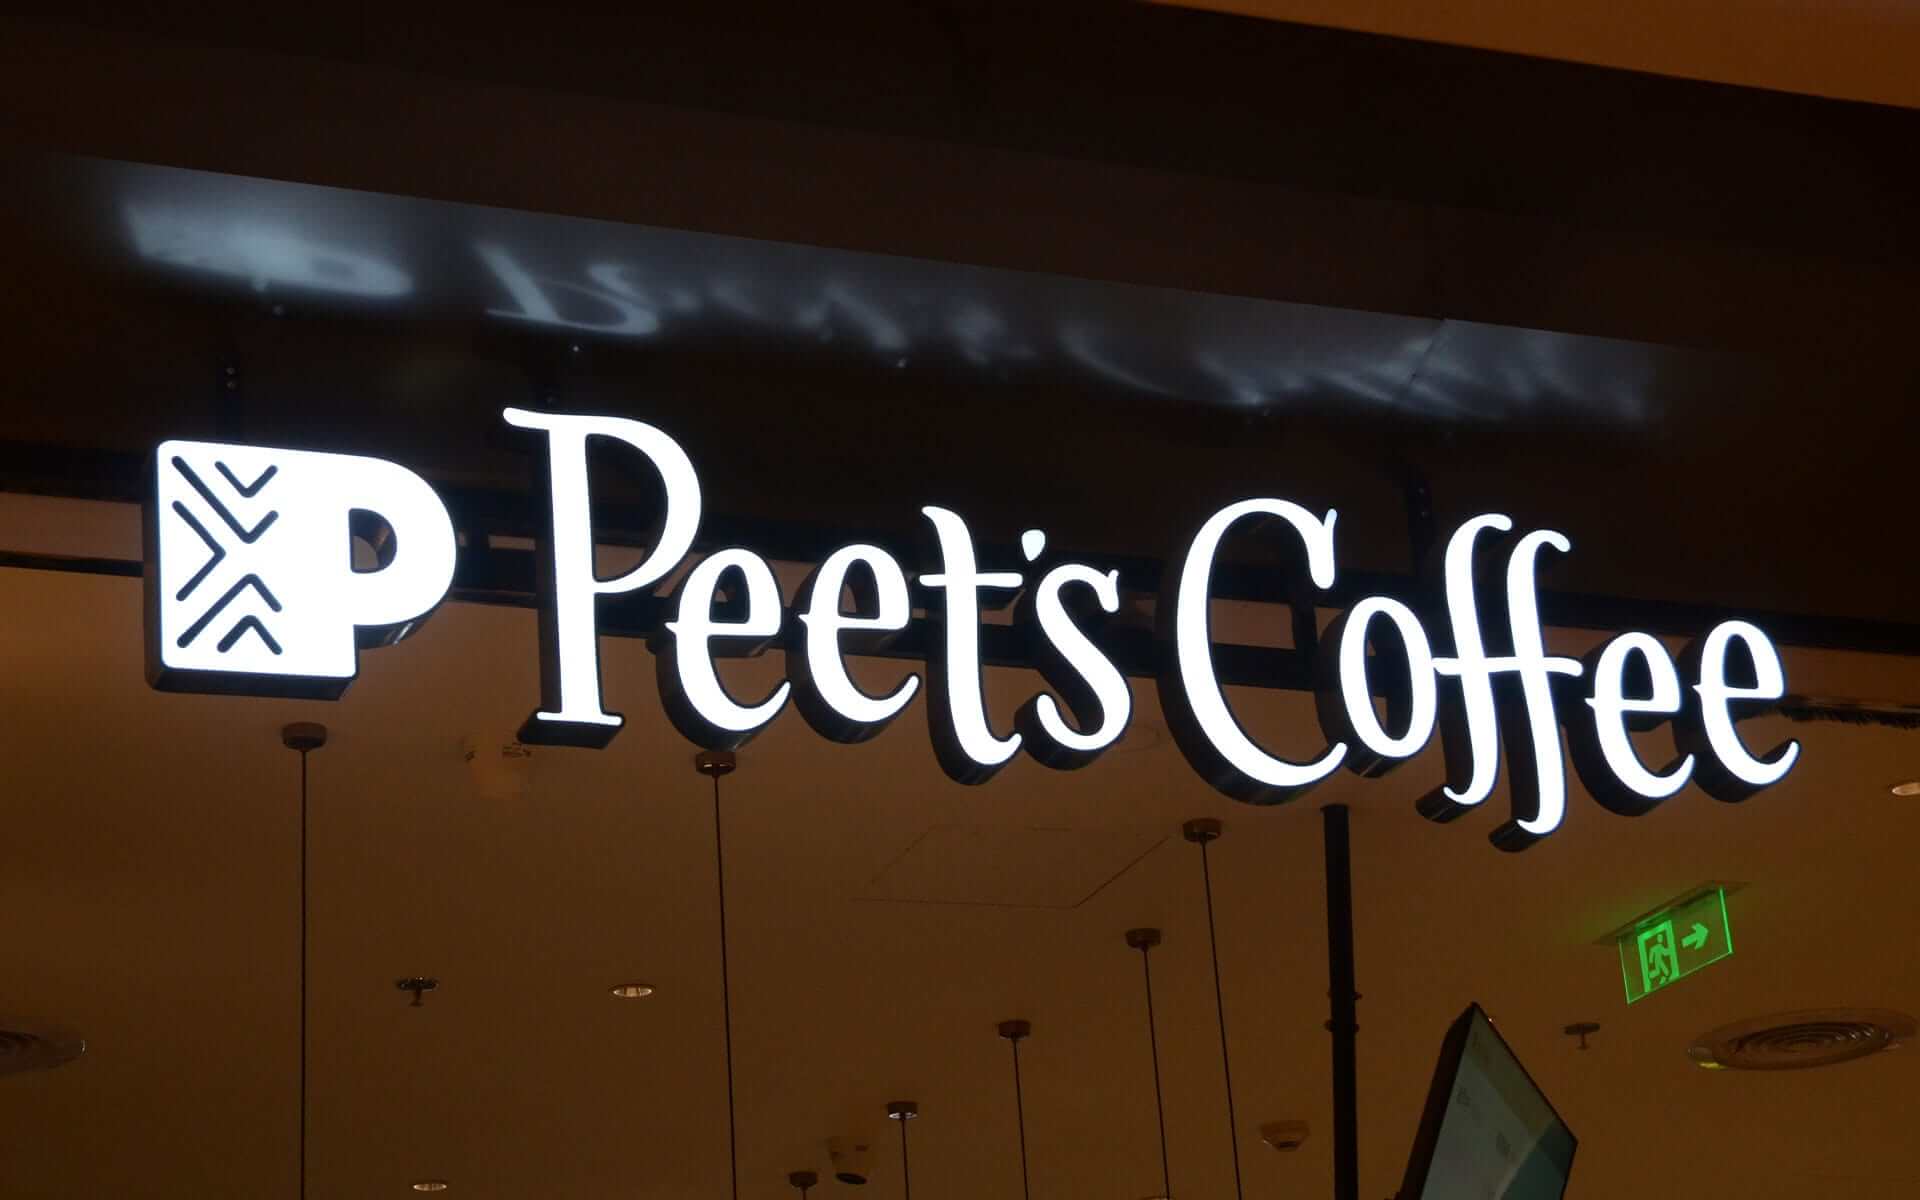 Trim Face-lit Metal Channel Letters for Peet's Coffee